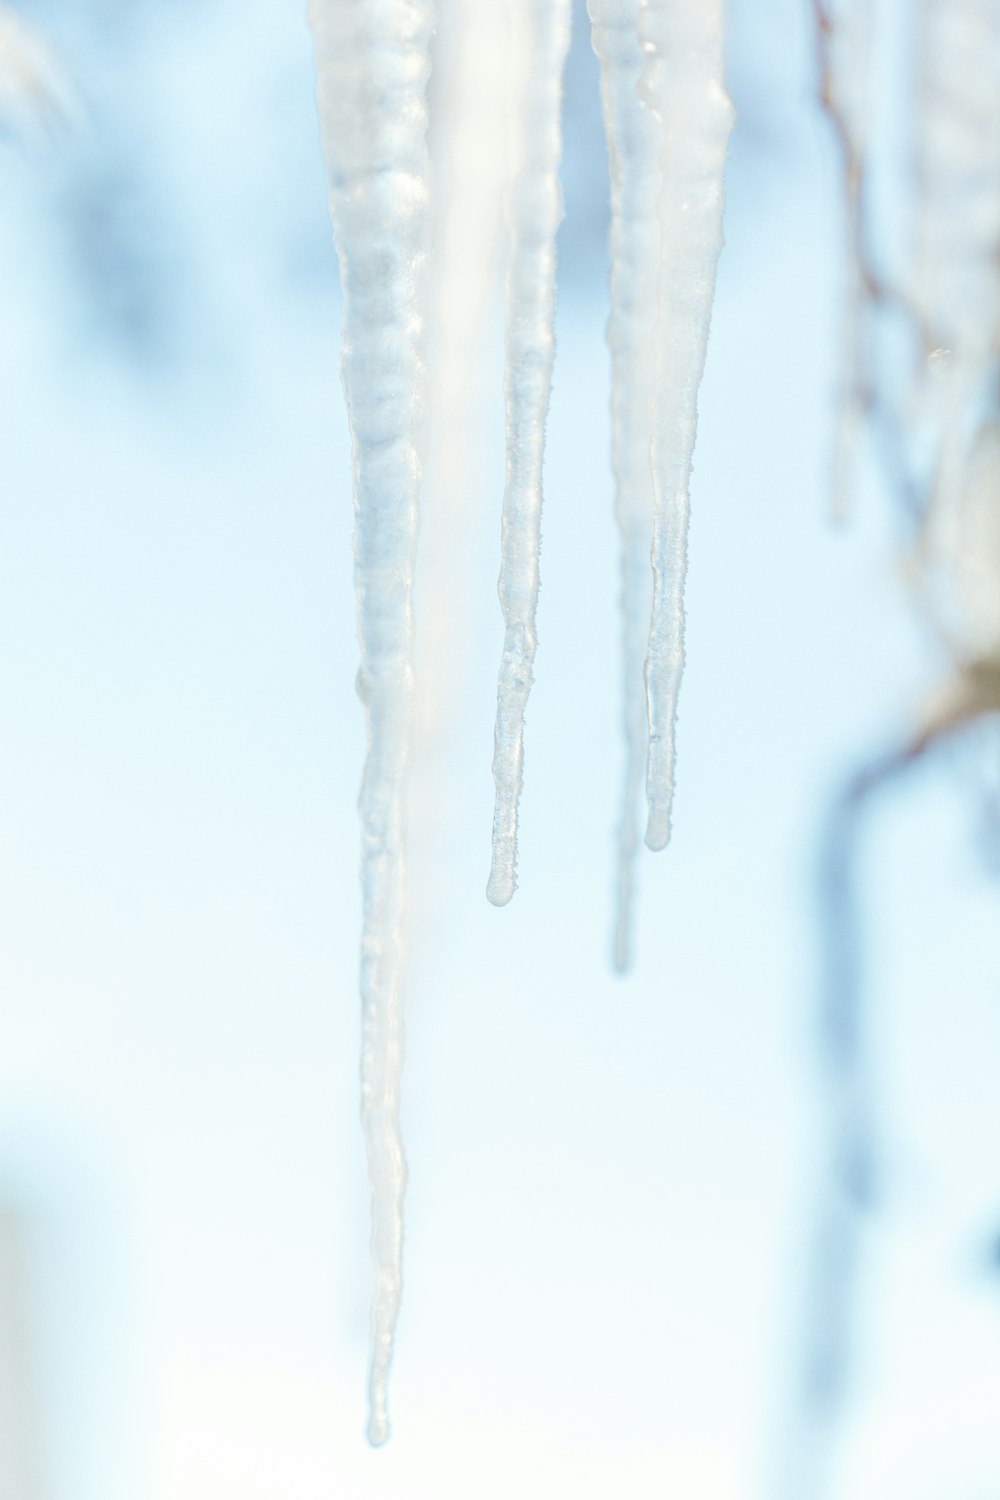 a bunch of icicles hanging from a tree